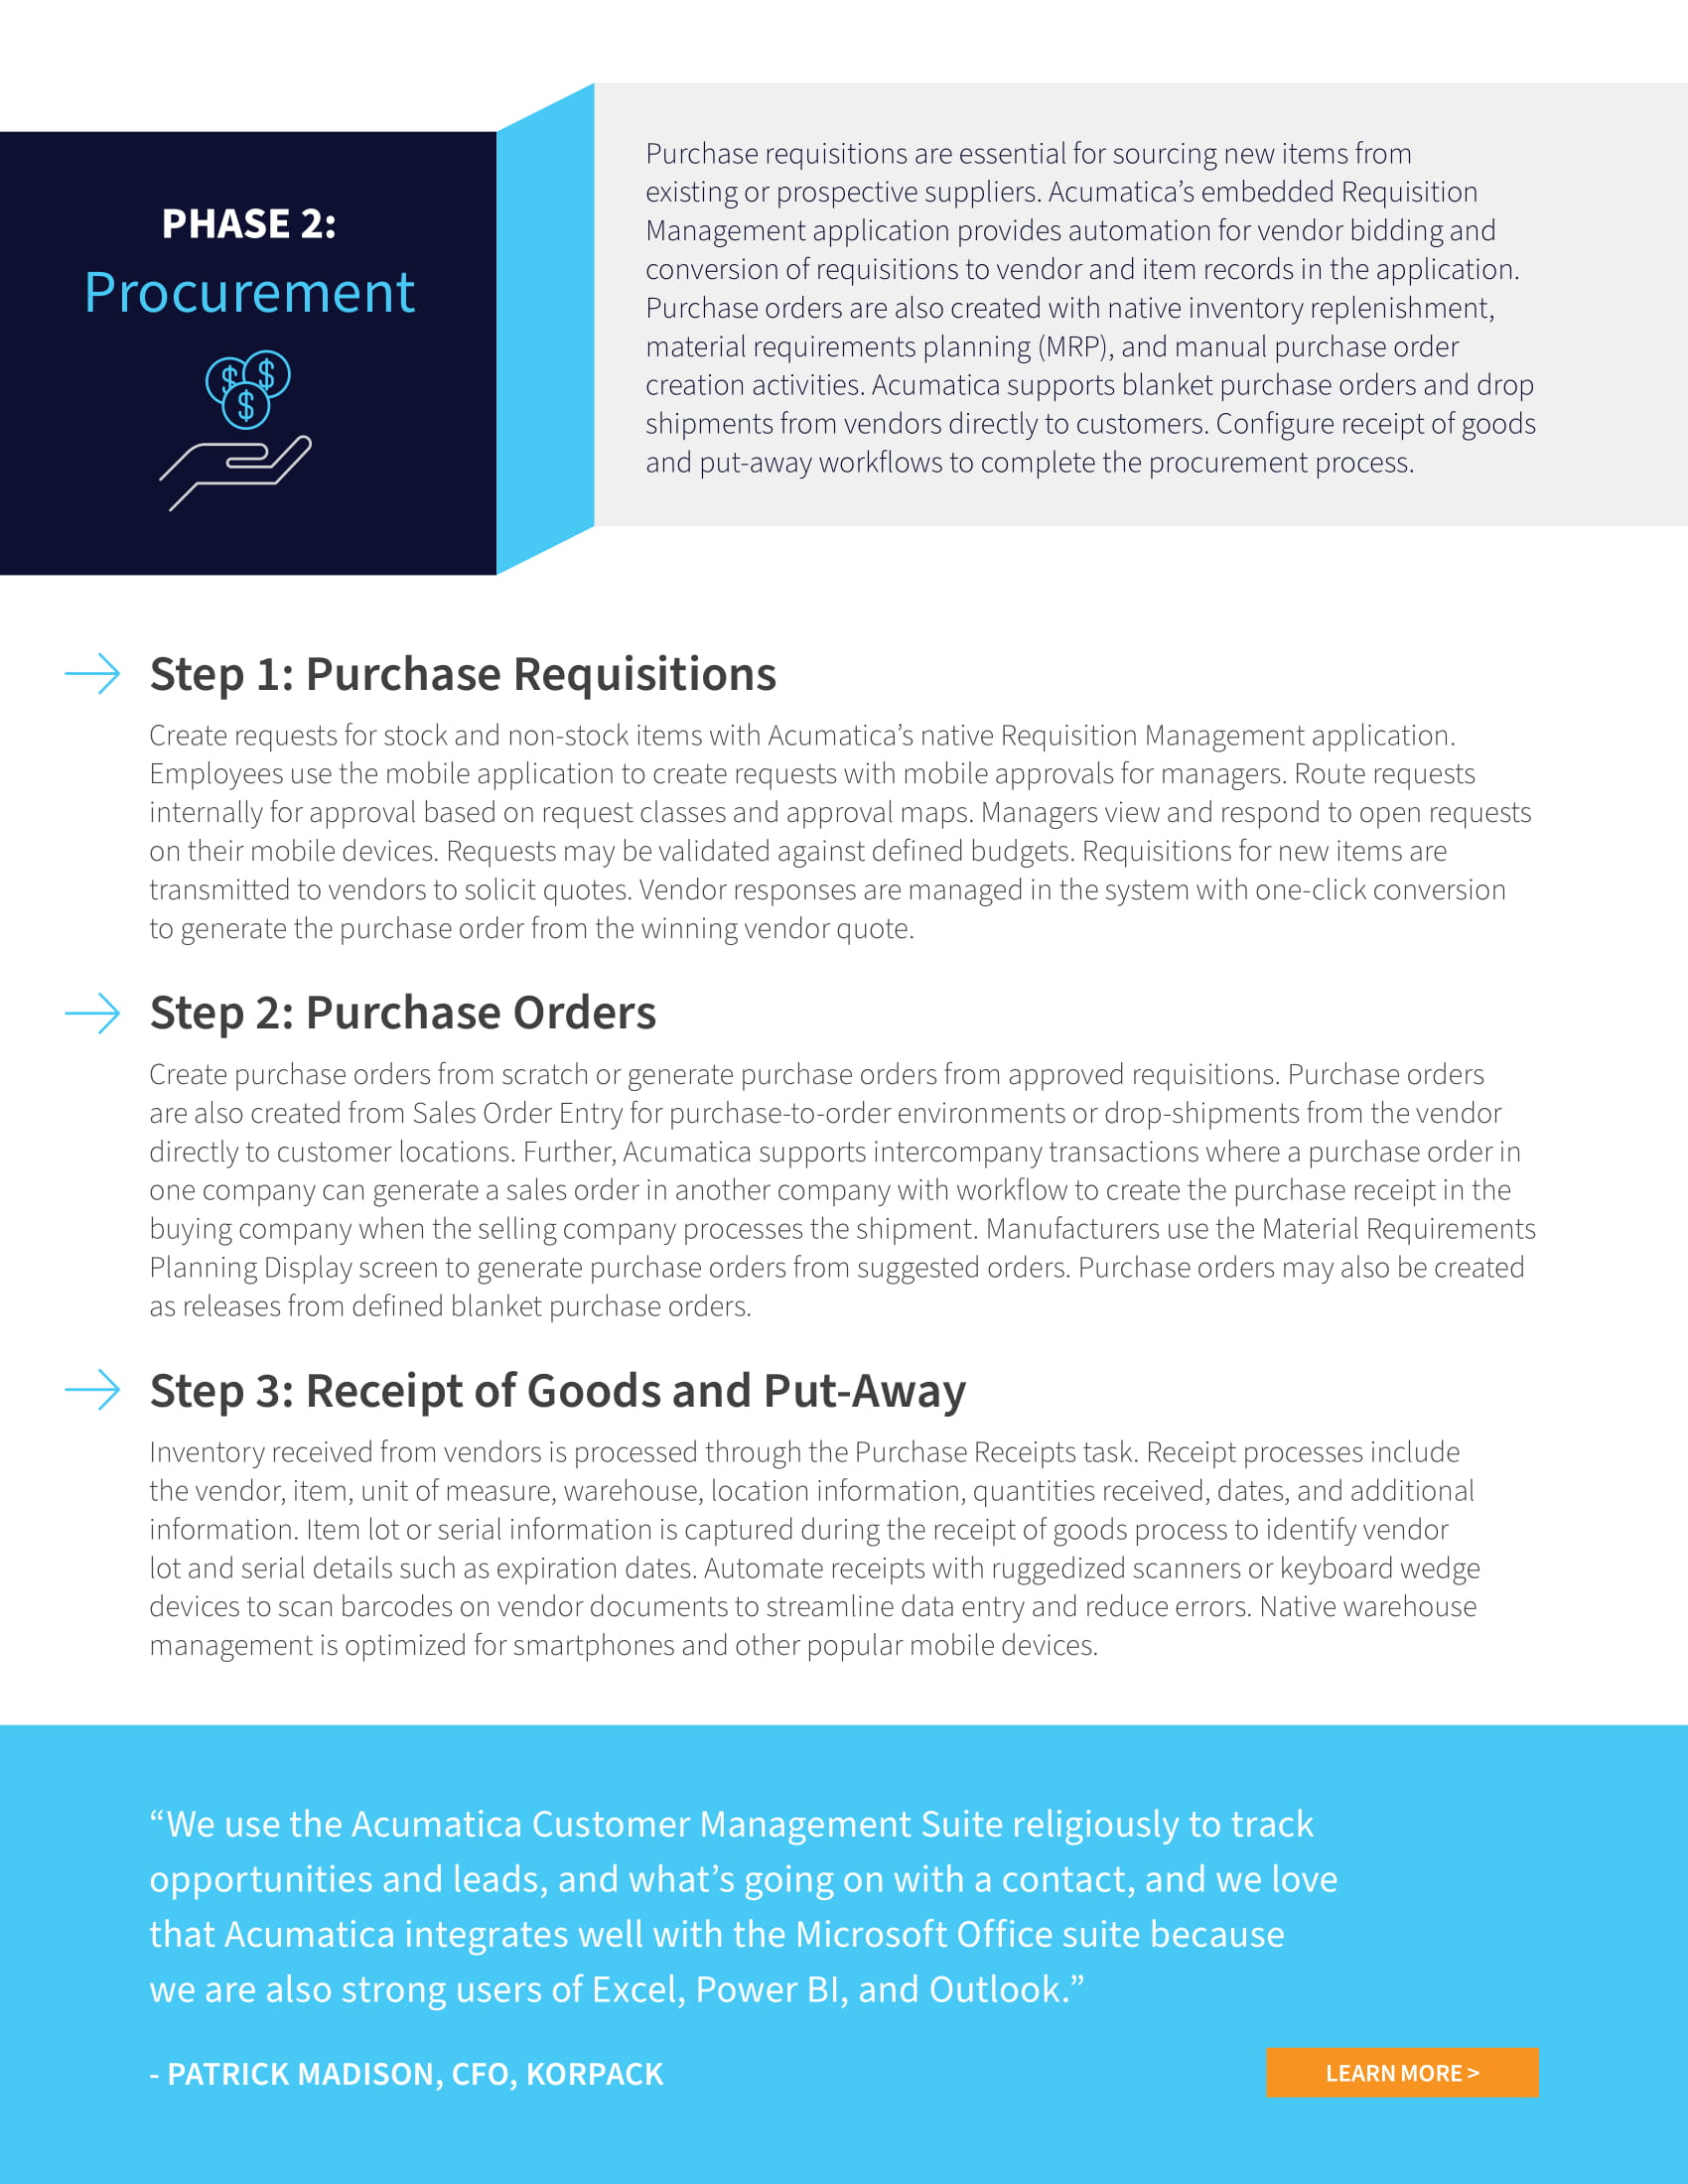 Procure-to-Pay (P2P) Automation: How to Get Started, page 2